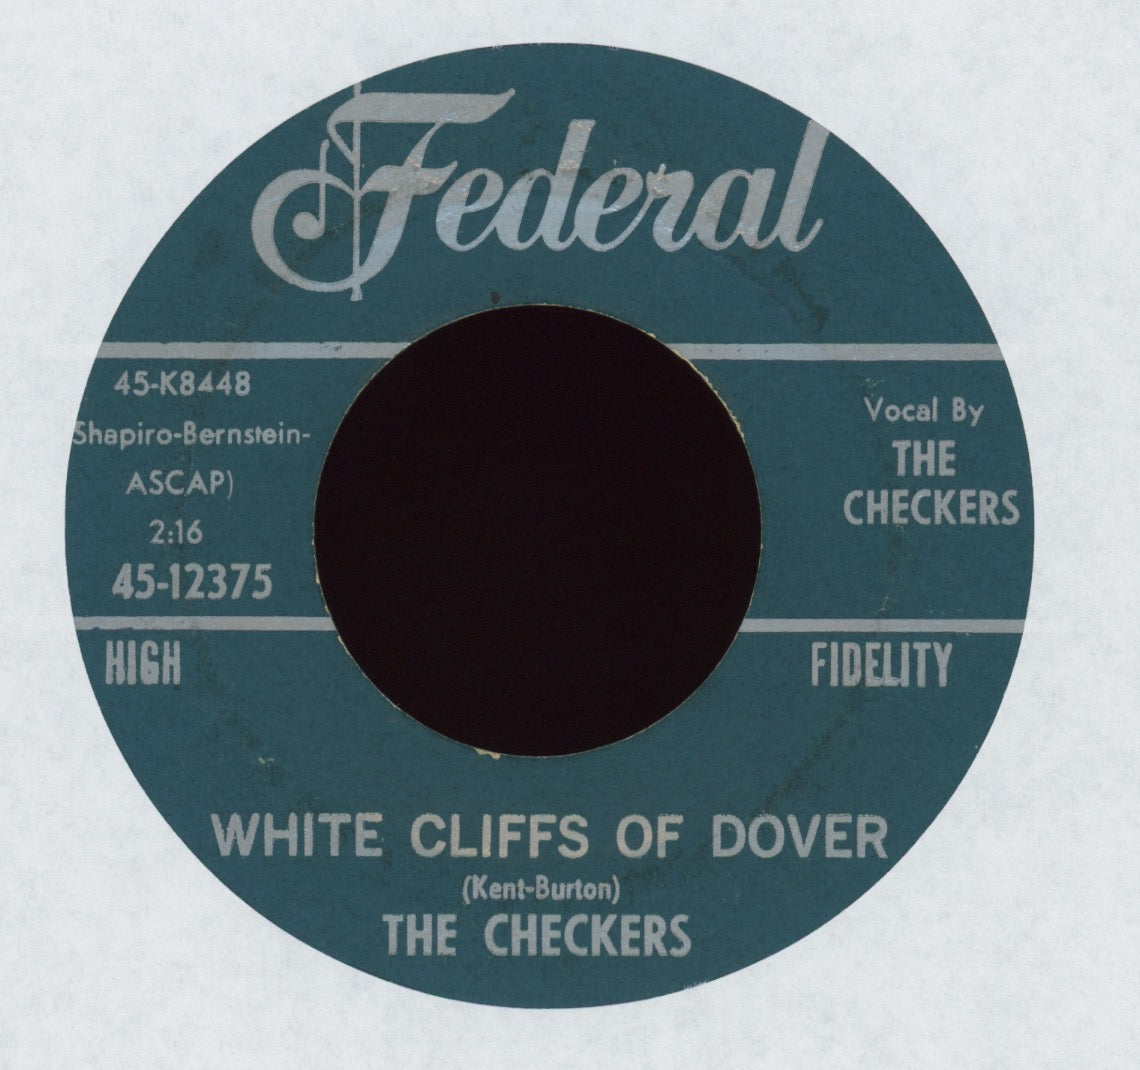 The Checkers - White Cliffs Of Dover on Federal